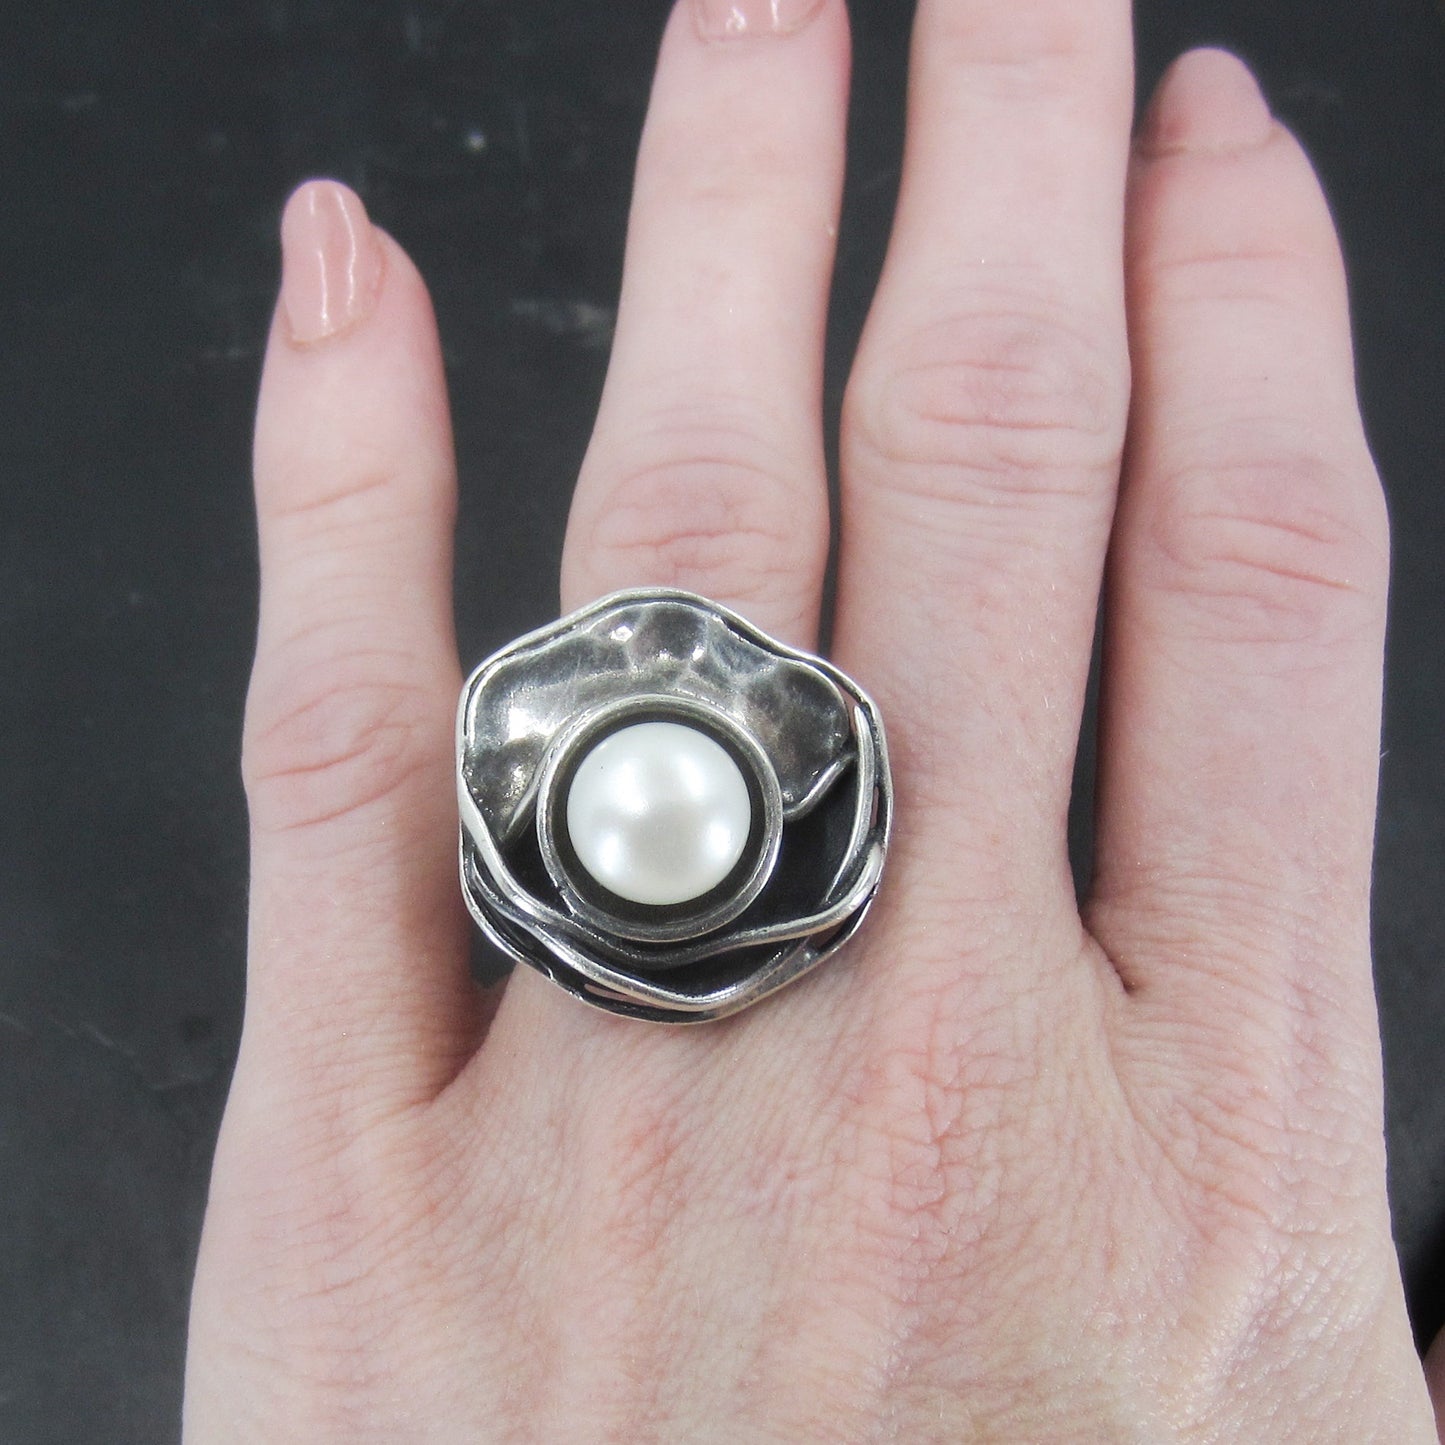 SOLD--Modernist Pearl Ring Sterling Silver c. 1970